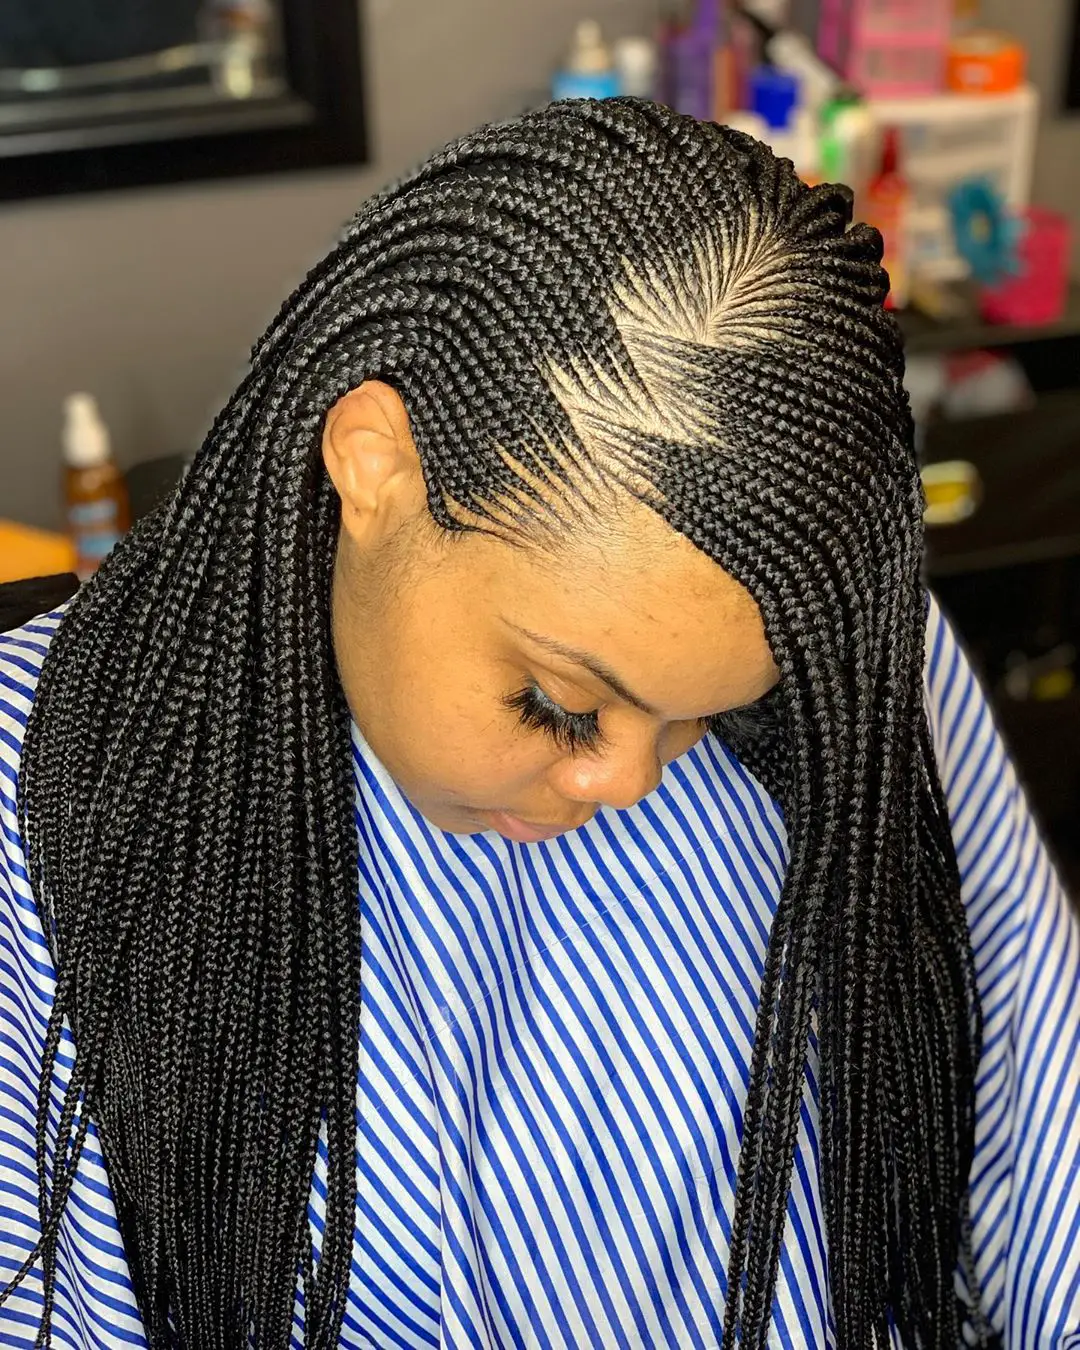 12 Hairstyles You Can Create With Box Braids | Braided hairstyles updo, Box braids  hairstyles, Box braids updo